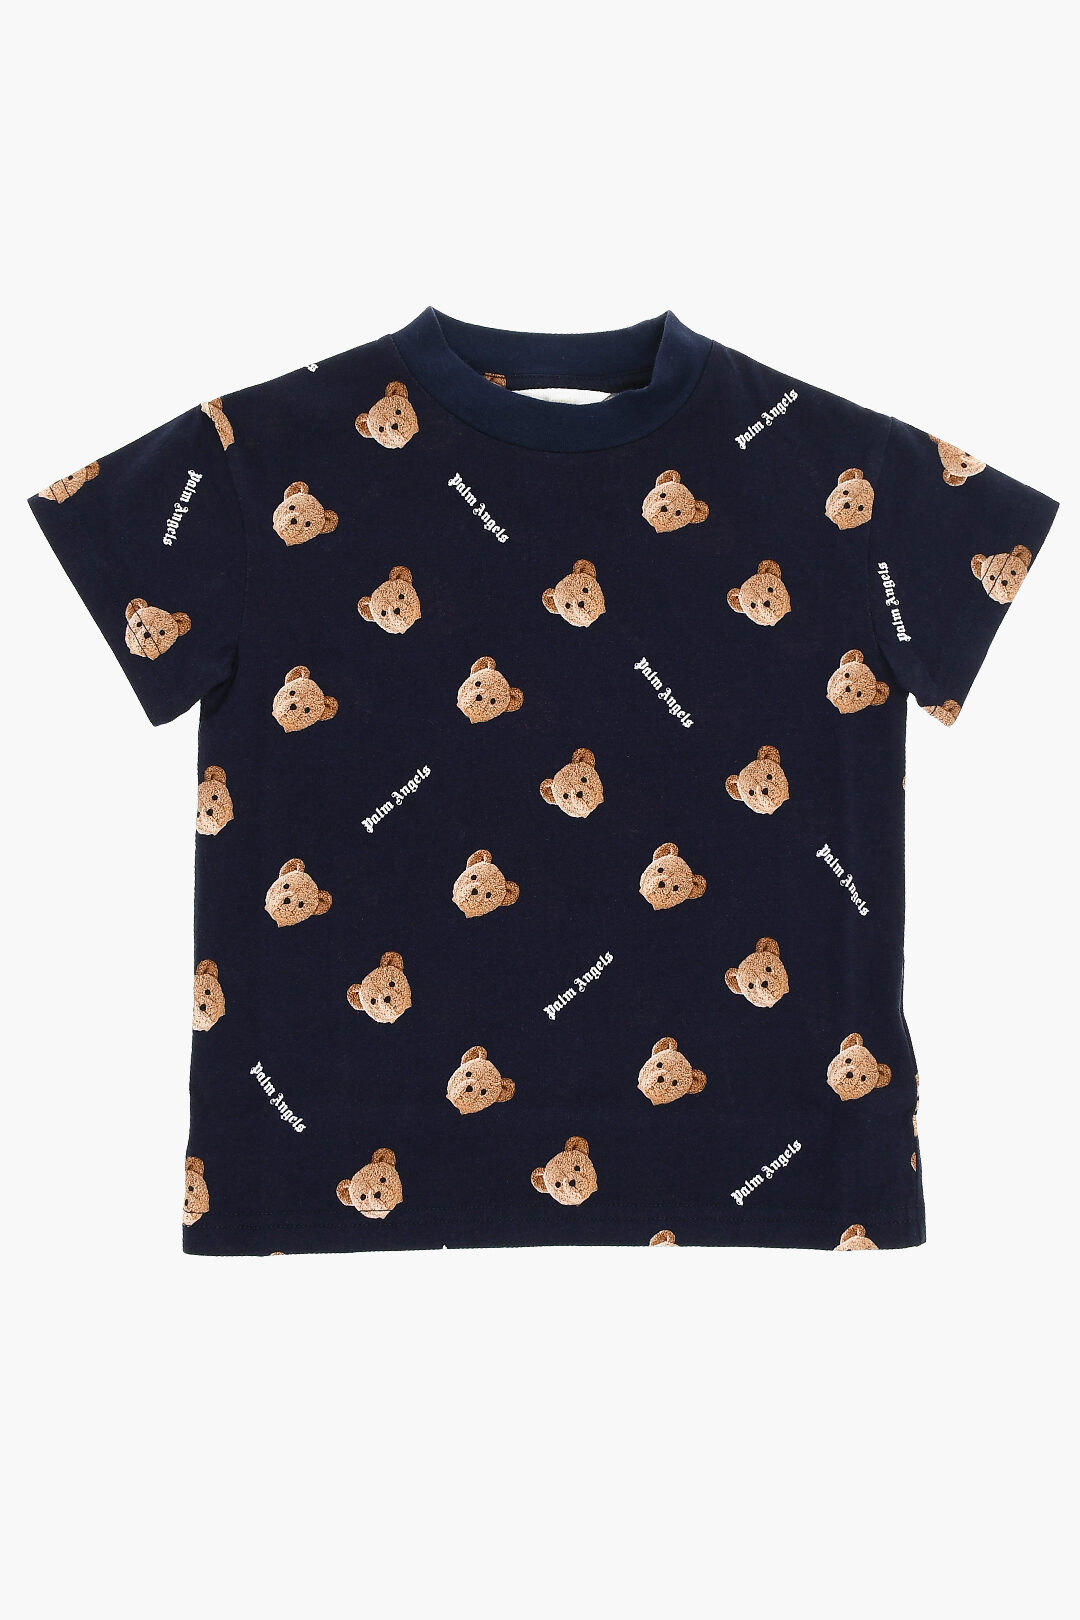 Palm Angels Kids All-Over Teddy Bear Printed Crew-neck T-Shirt boys -  Glamood Outlet